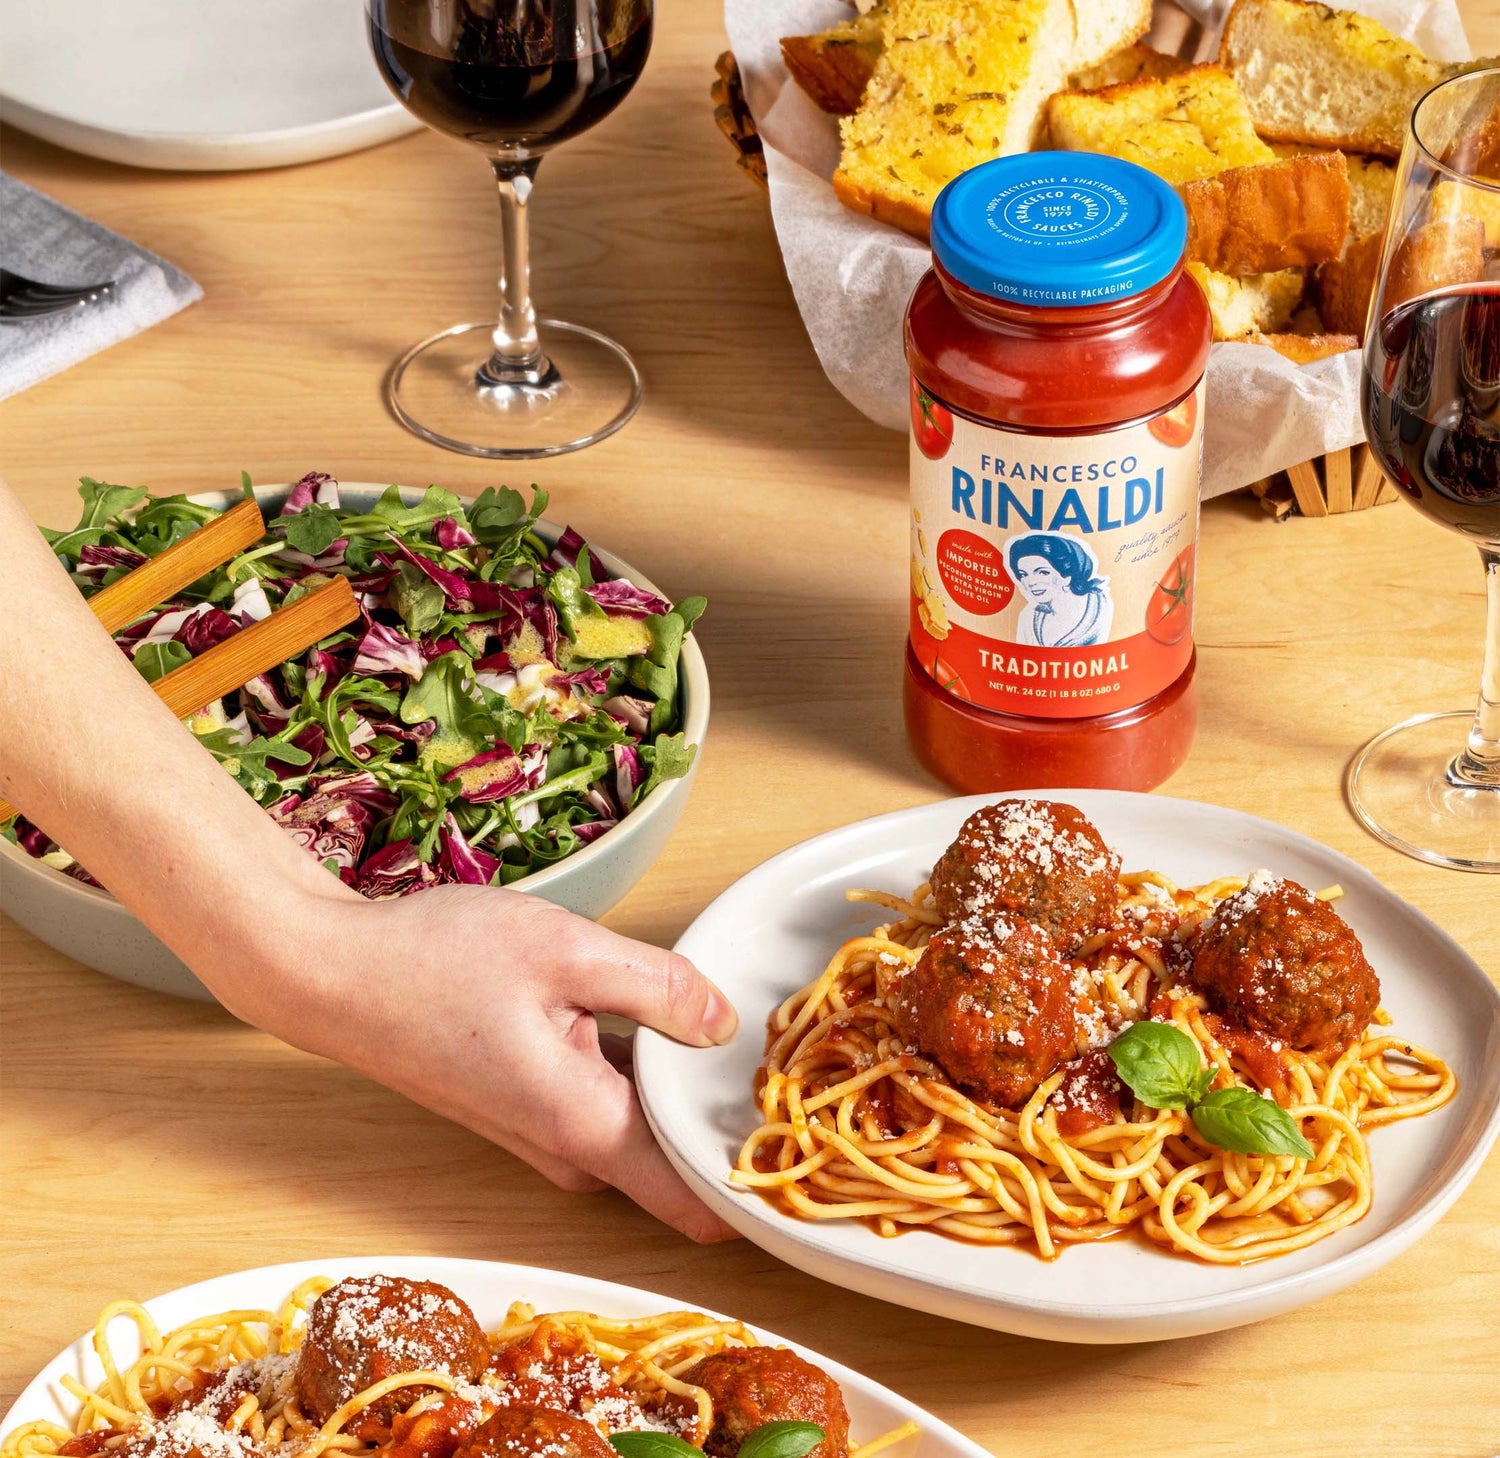 A jar of Francesco Rinaldi sauce next to full plats of salad and spaghetti and two glasses of red wine.